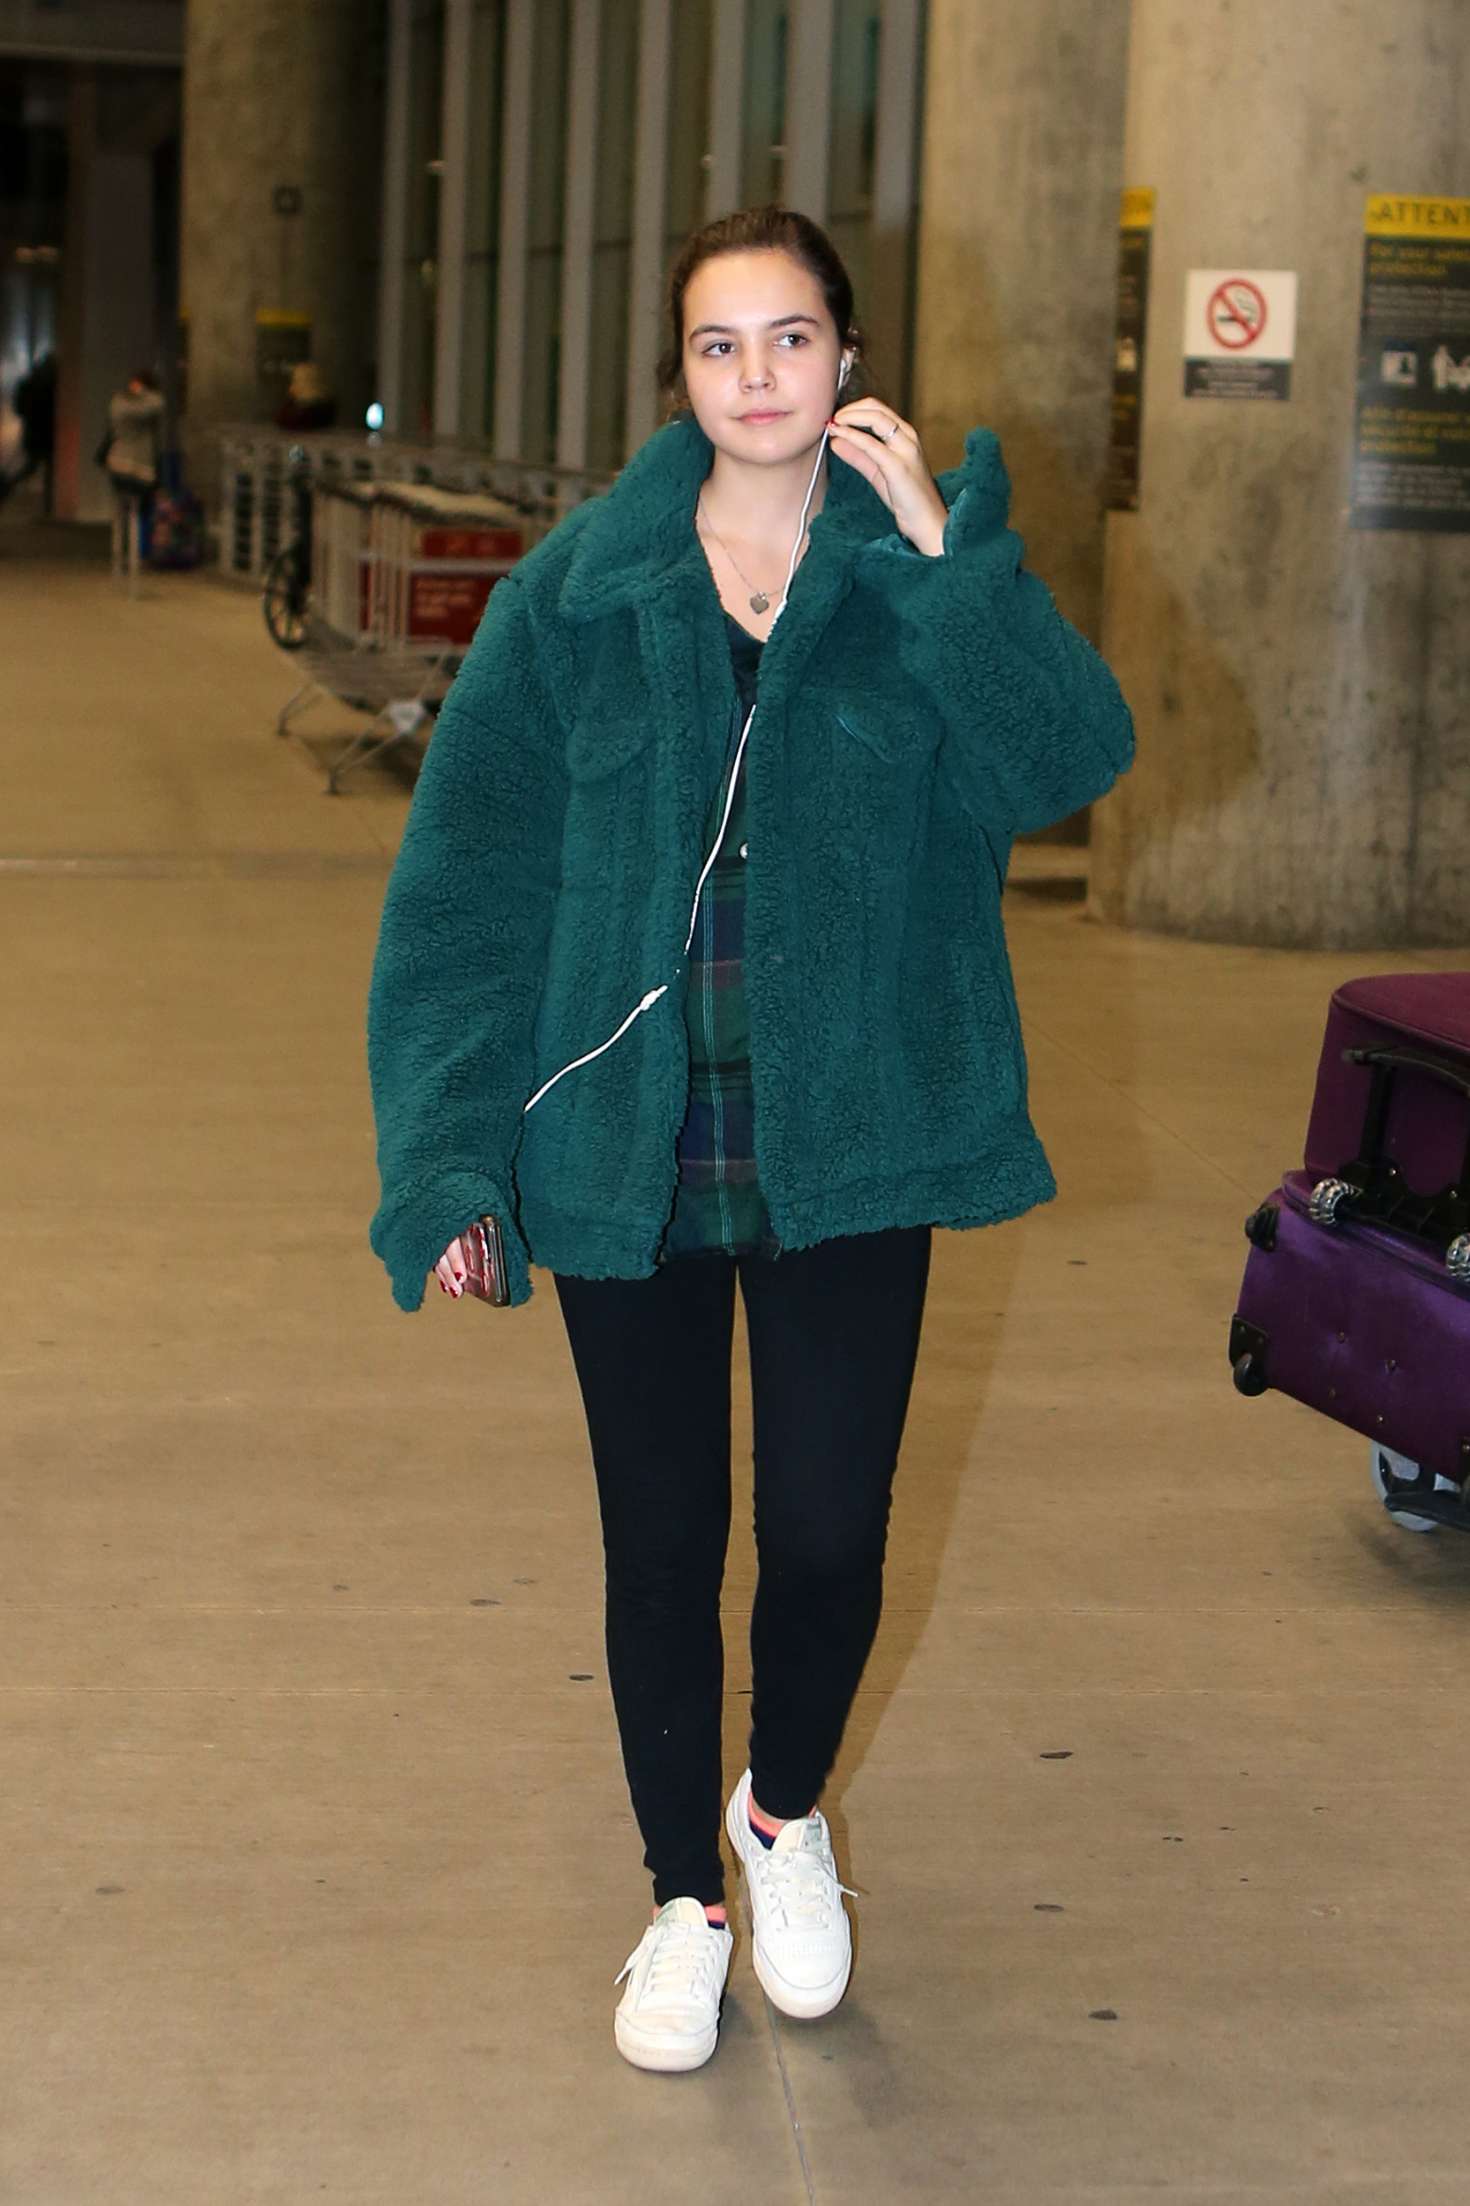 Bailee Madison â€“ Arriving at Pearson International Airport in Toronto